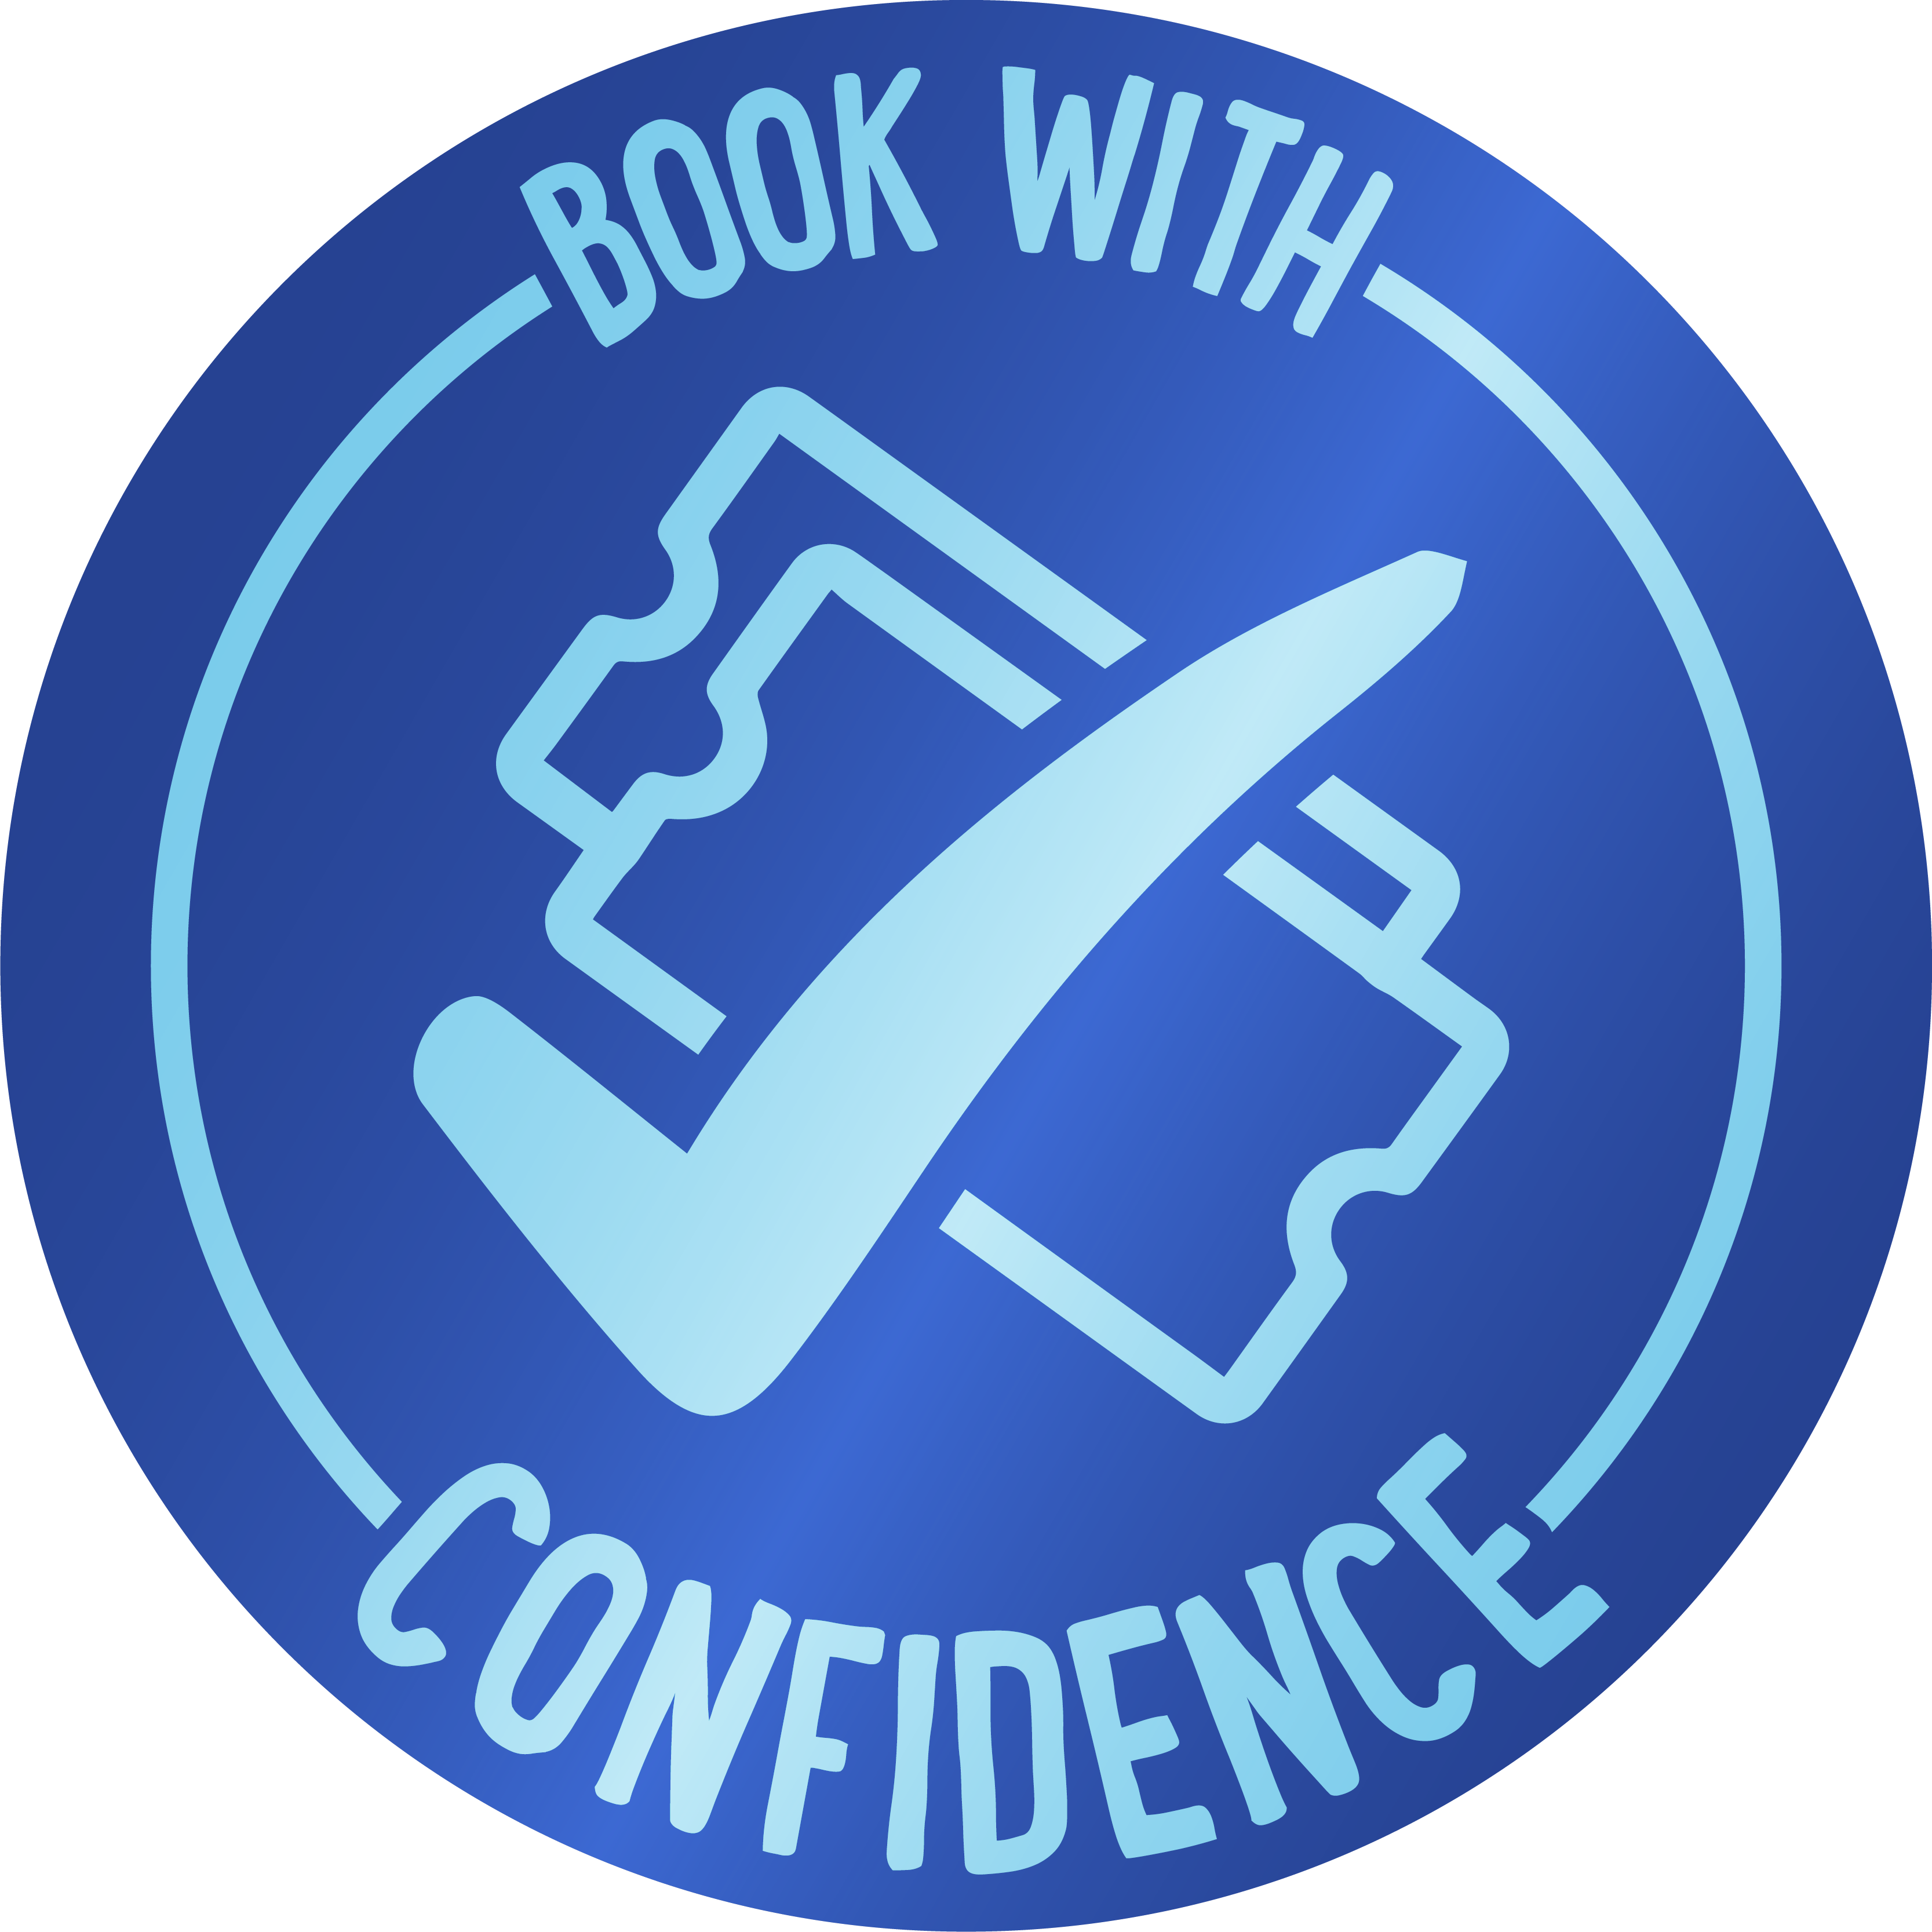 Booking with confidence logo